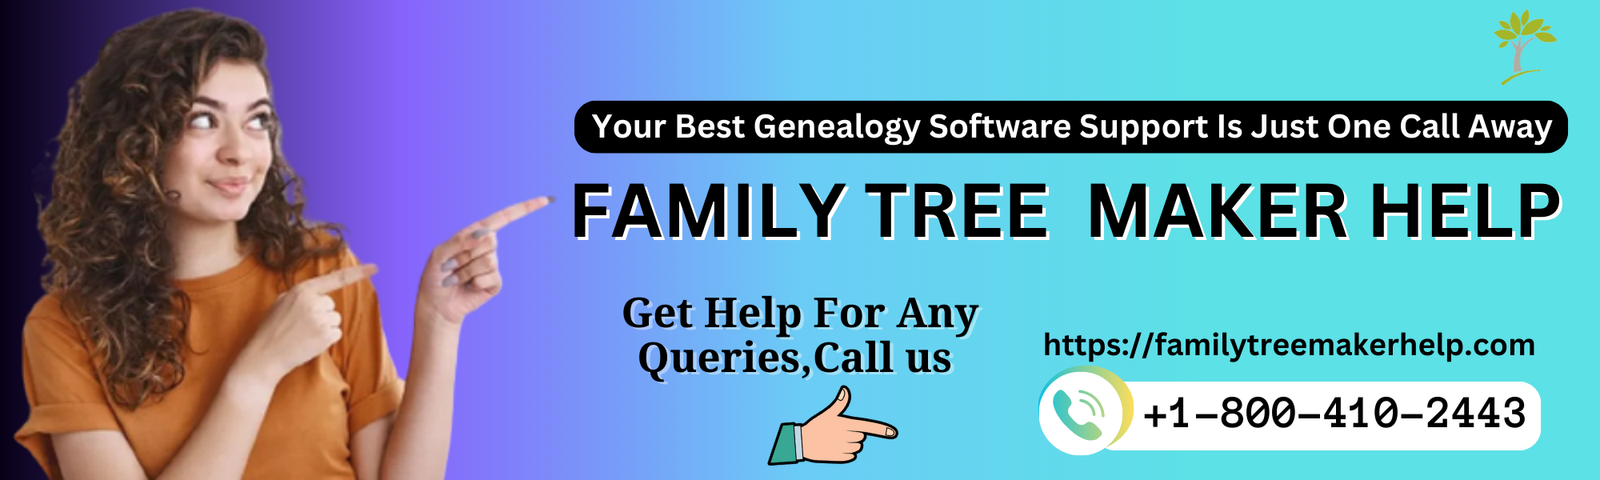 Family Tree Maker Help Number +1-800-410-2443